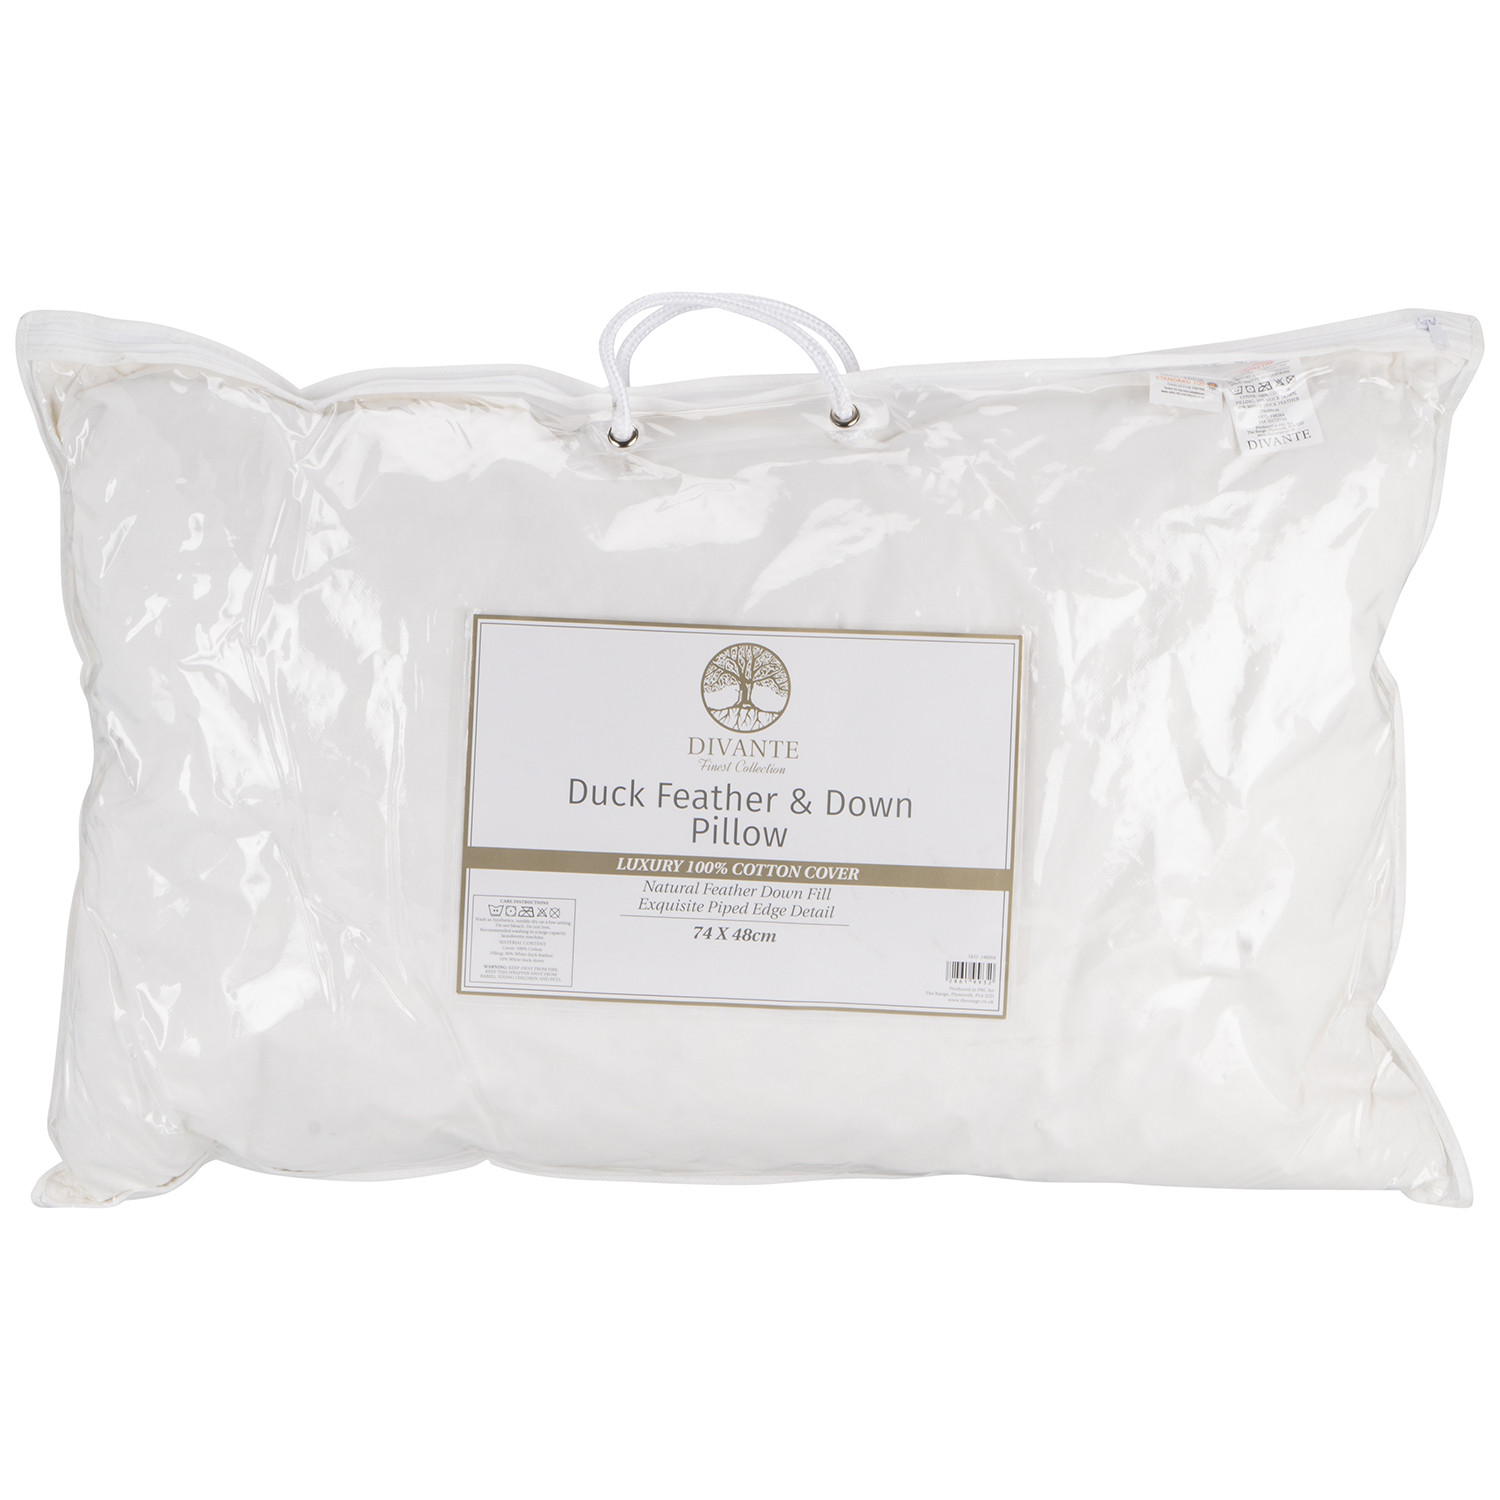 Divante White Soft Duck Feather and Down Pillow Image 1